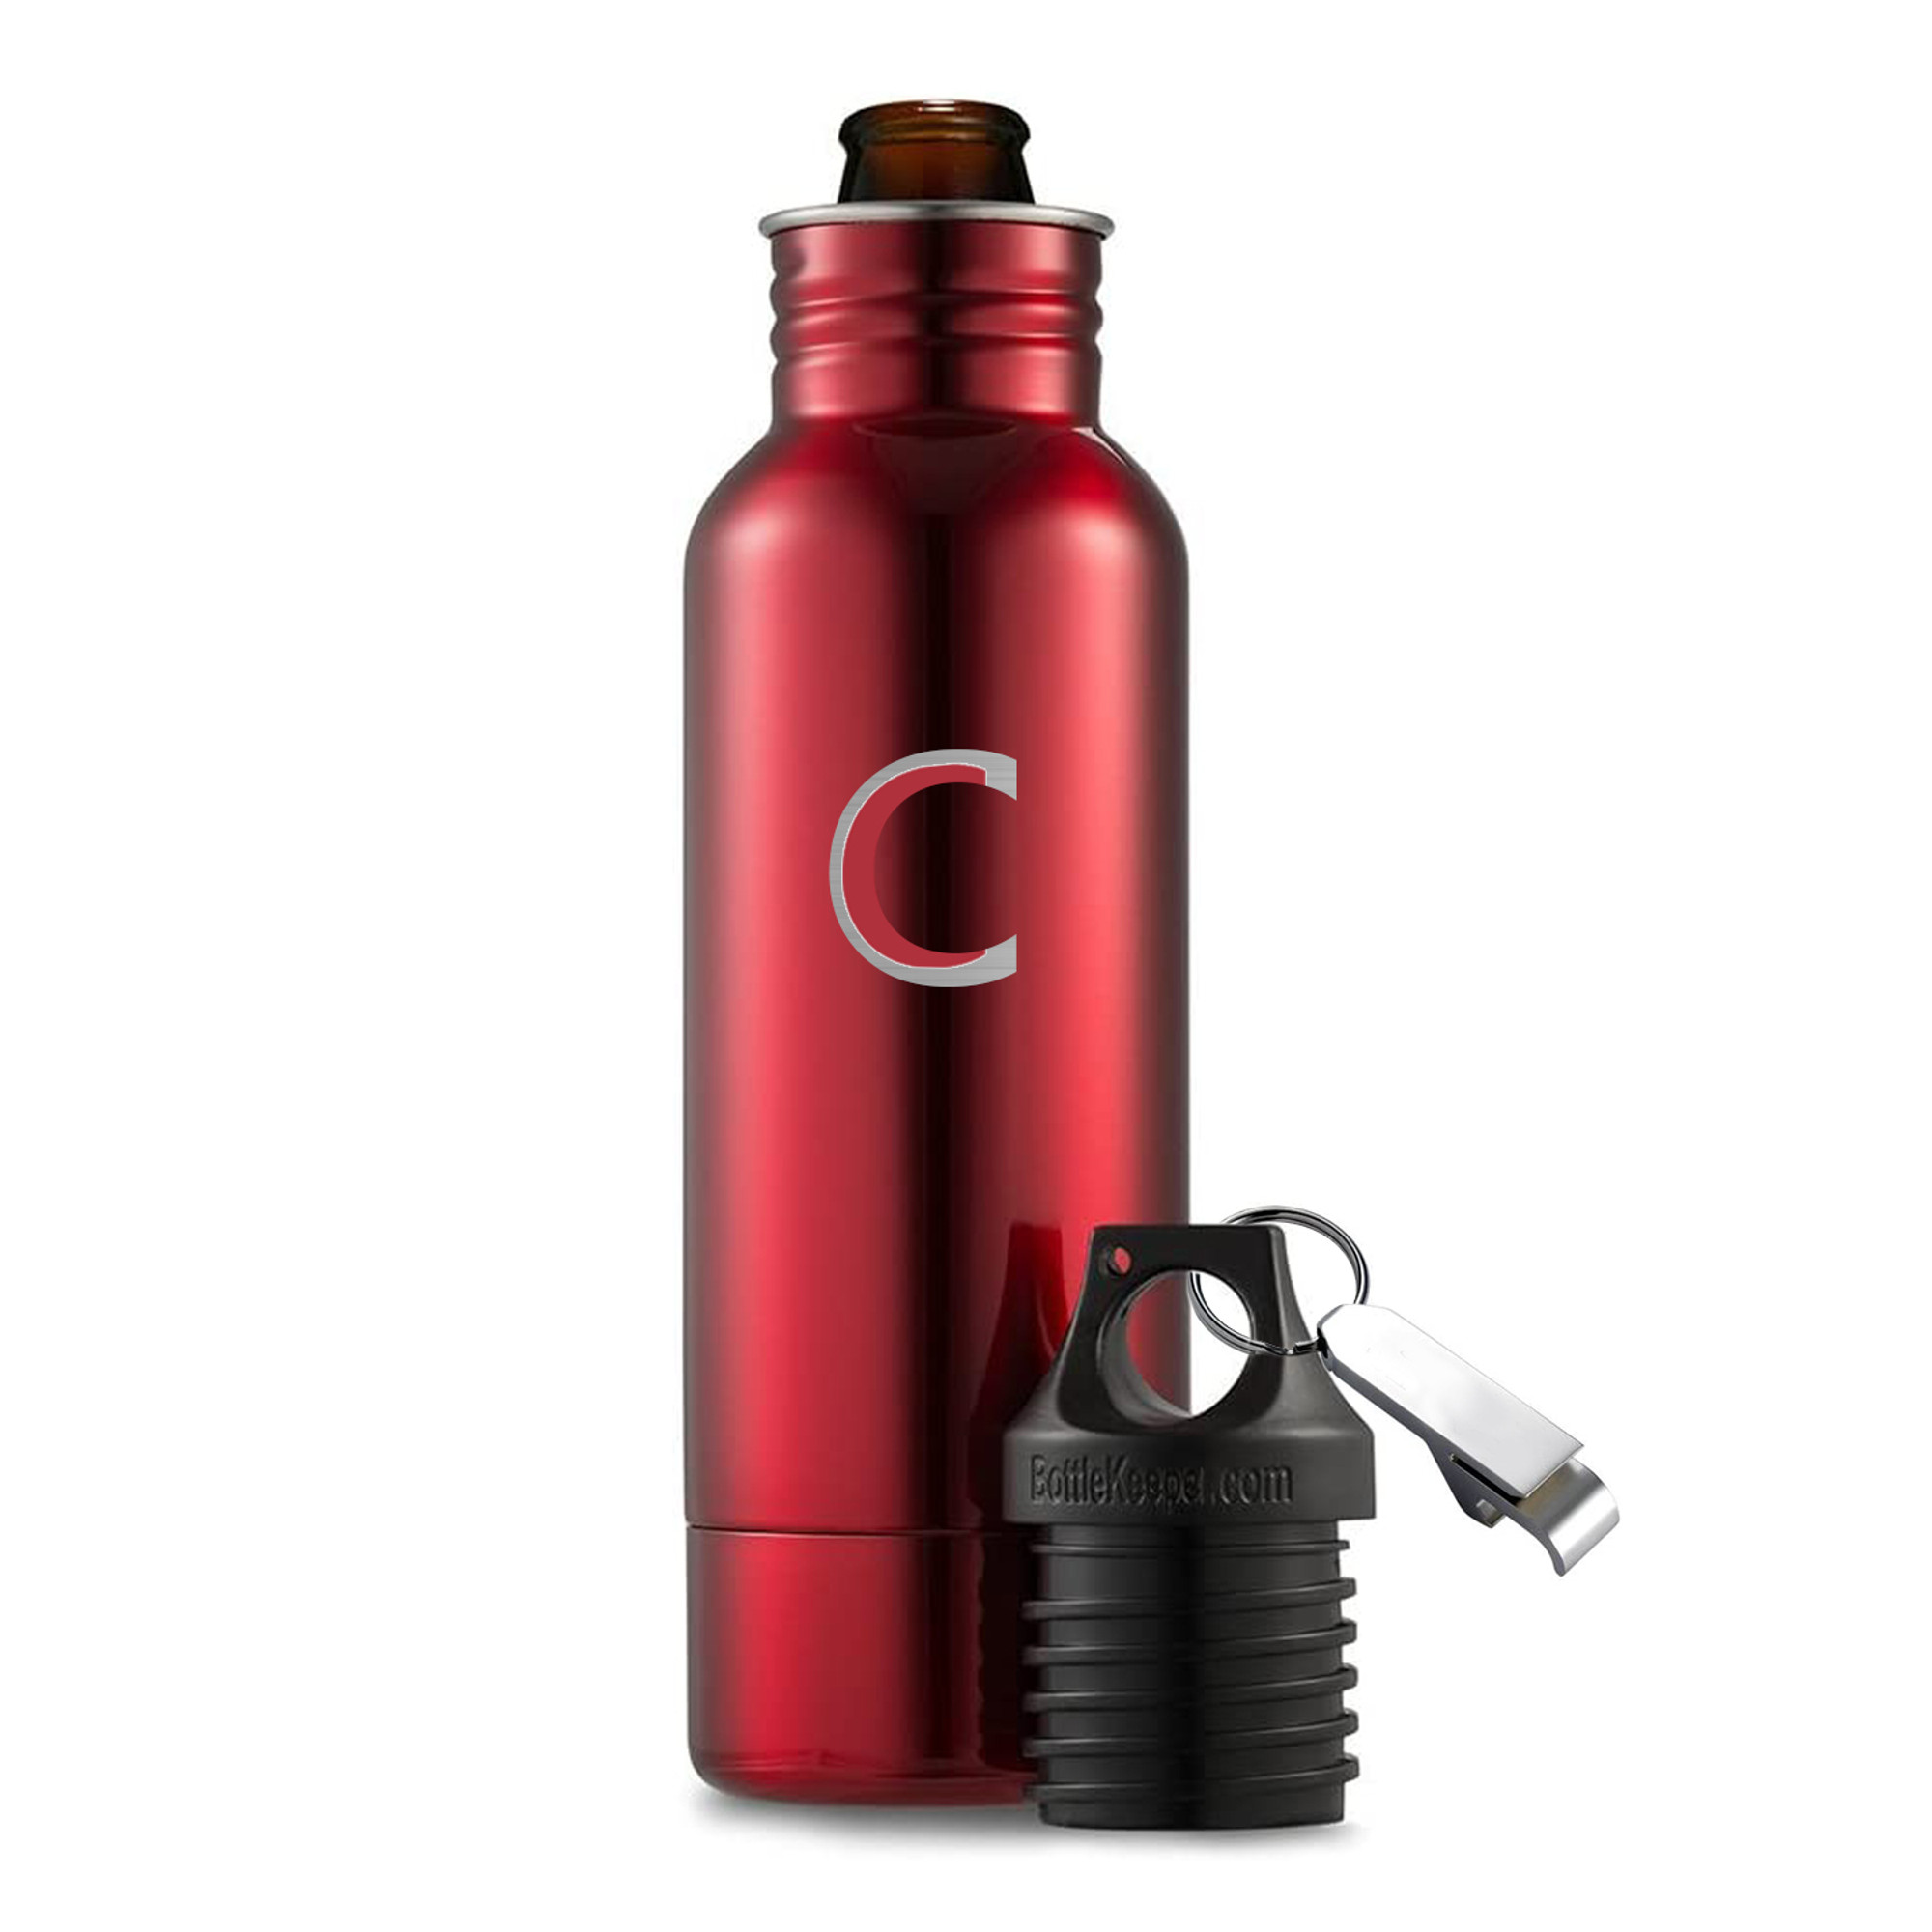 https://cdn11.bigcommerce.com/s-f0j9ofpmpu/images/stencil/2000x2000/products/249197/841172/insulated-stainlsssteel-beerstubby-red__22412.1656531457.jpg?c=2